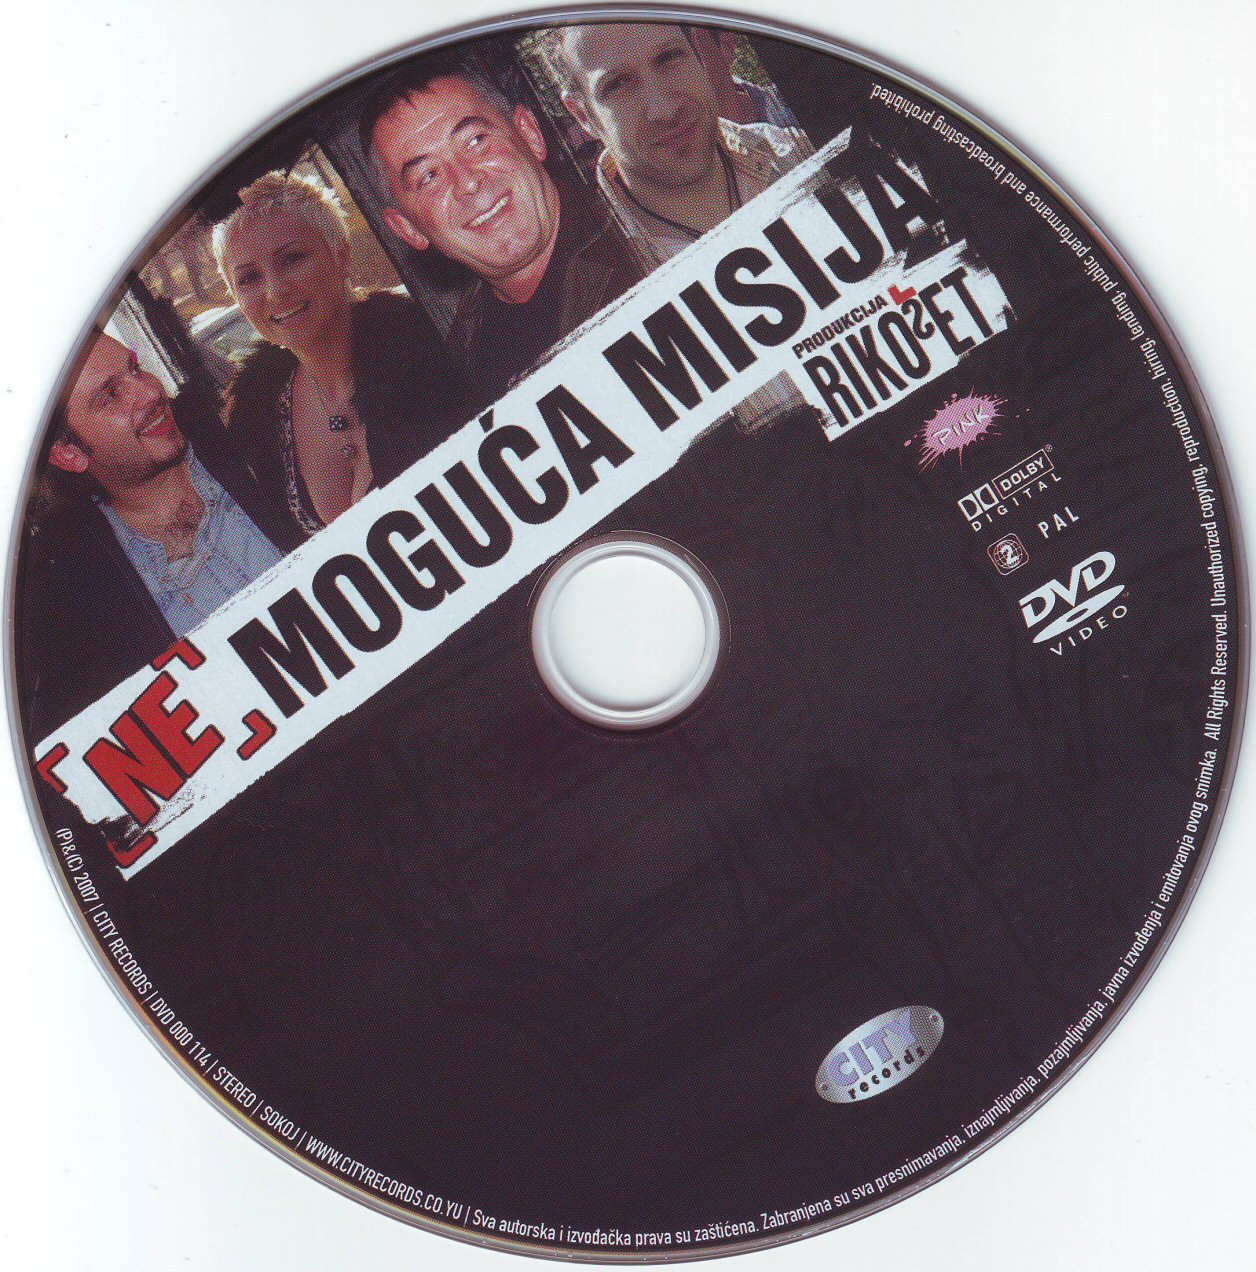 Click to view full size image -  DVD Cover - N - DVD - NE] MOGUCA MISIJA - CD - DVD - NE] MOGUCA MISIJA - CD.jpg